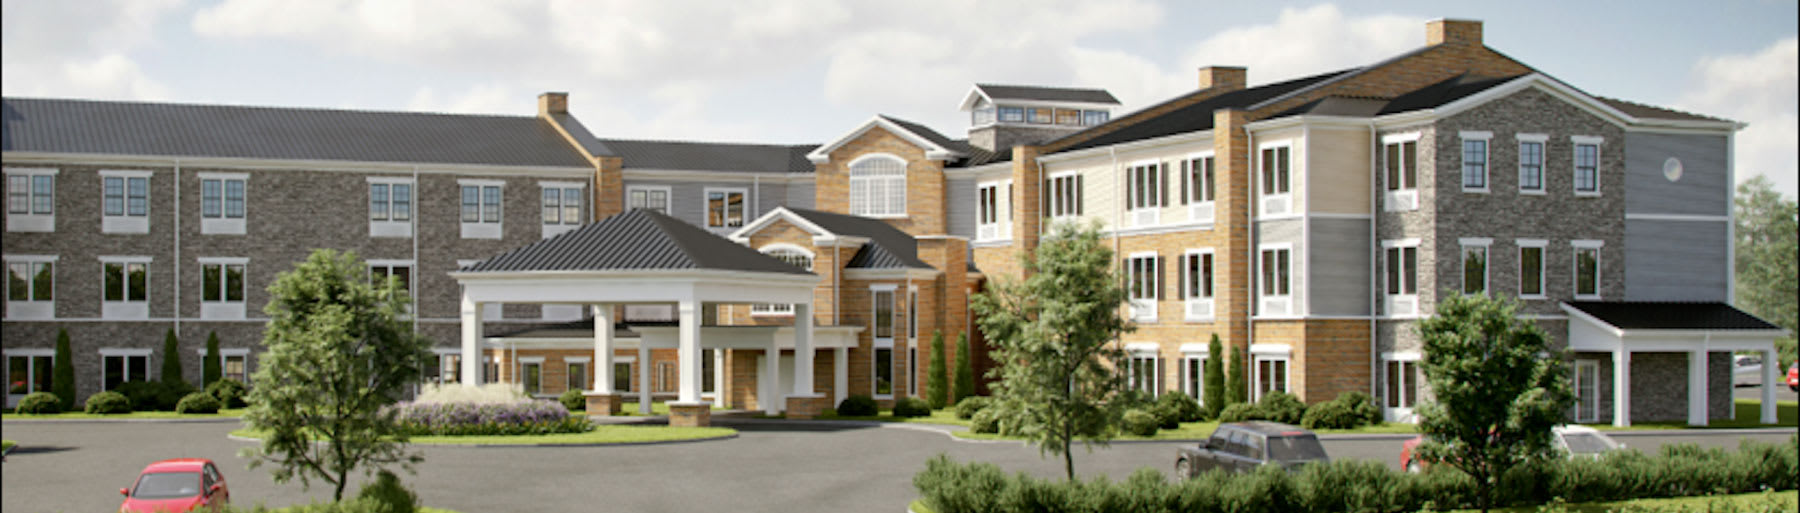 Provision Living at West Chester community exterior